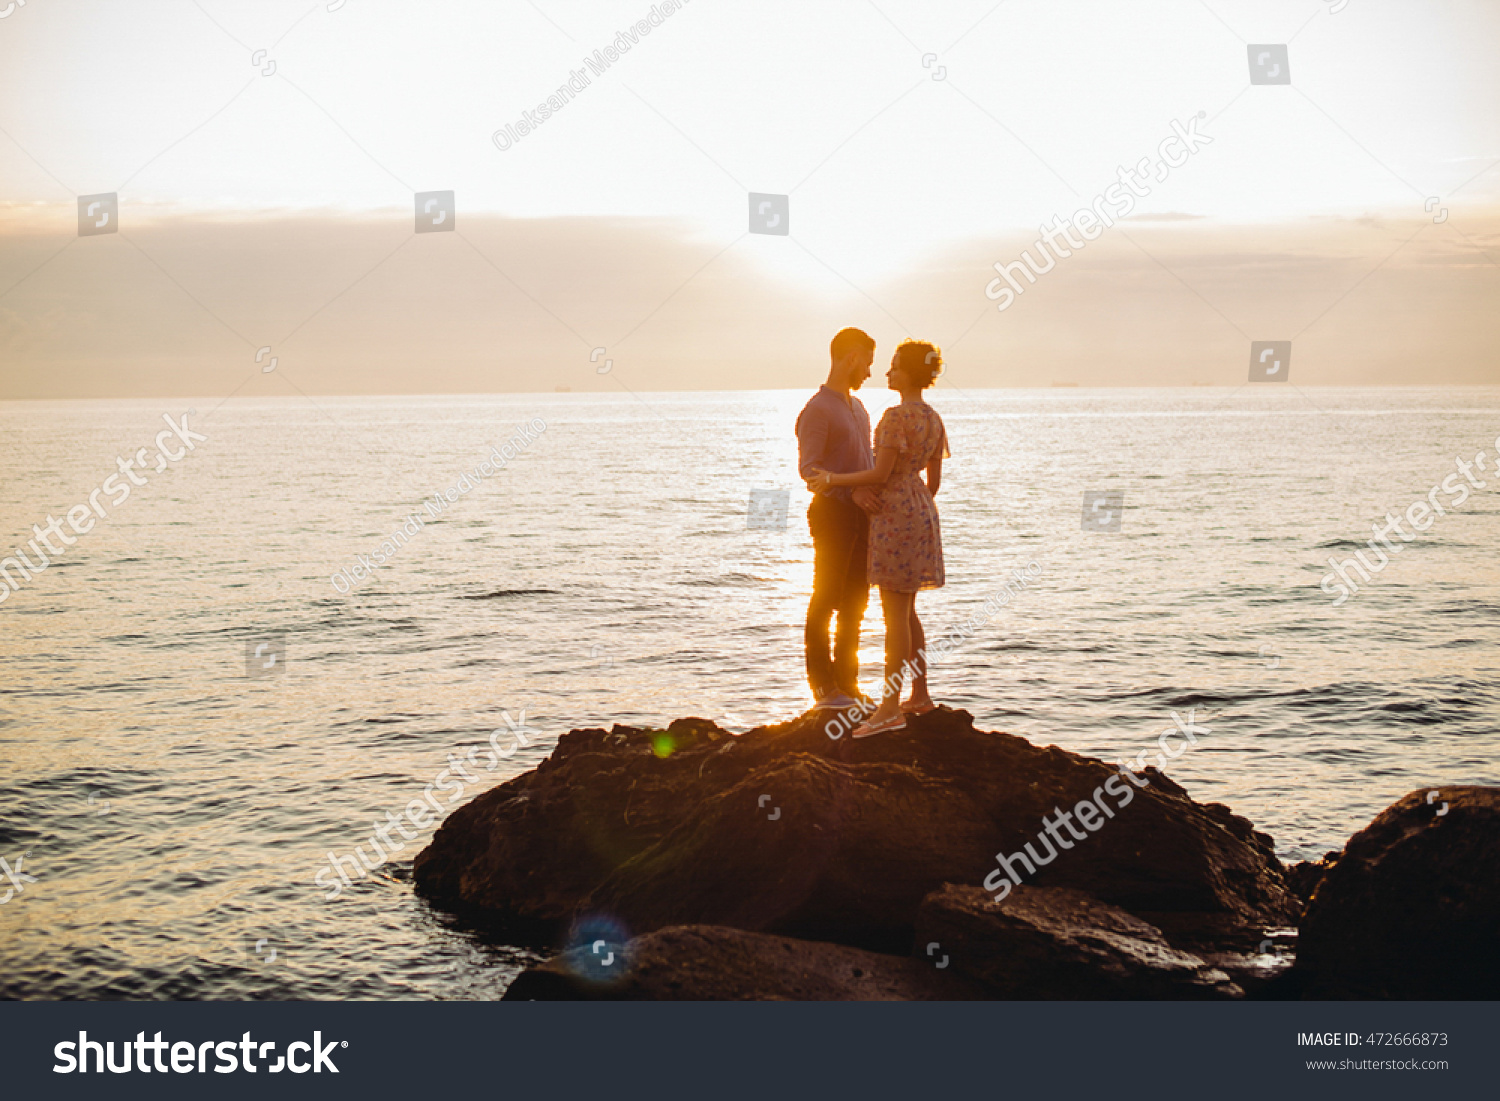 Bright evening sun shines over the couple posing on the stones by the calm sea #472666873